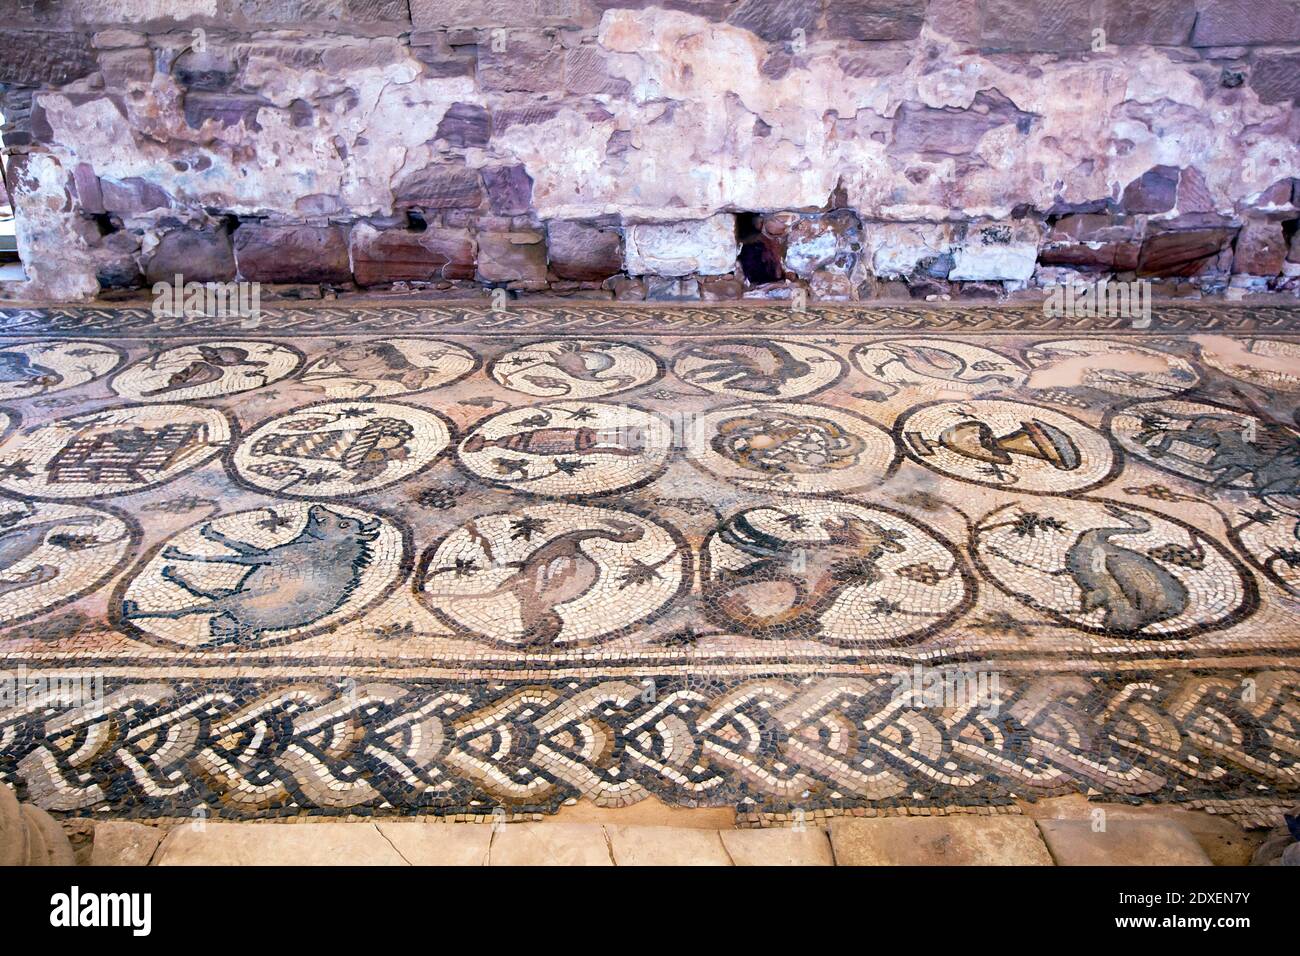 The North Aisle of the Petra Church displaying mosaics dating to 5th century AD. There are 84 medallions in three rows surrounded by Guilloche border. Stock Photo